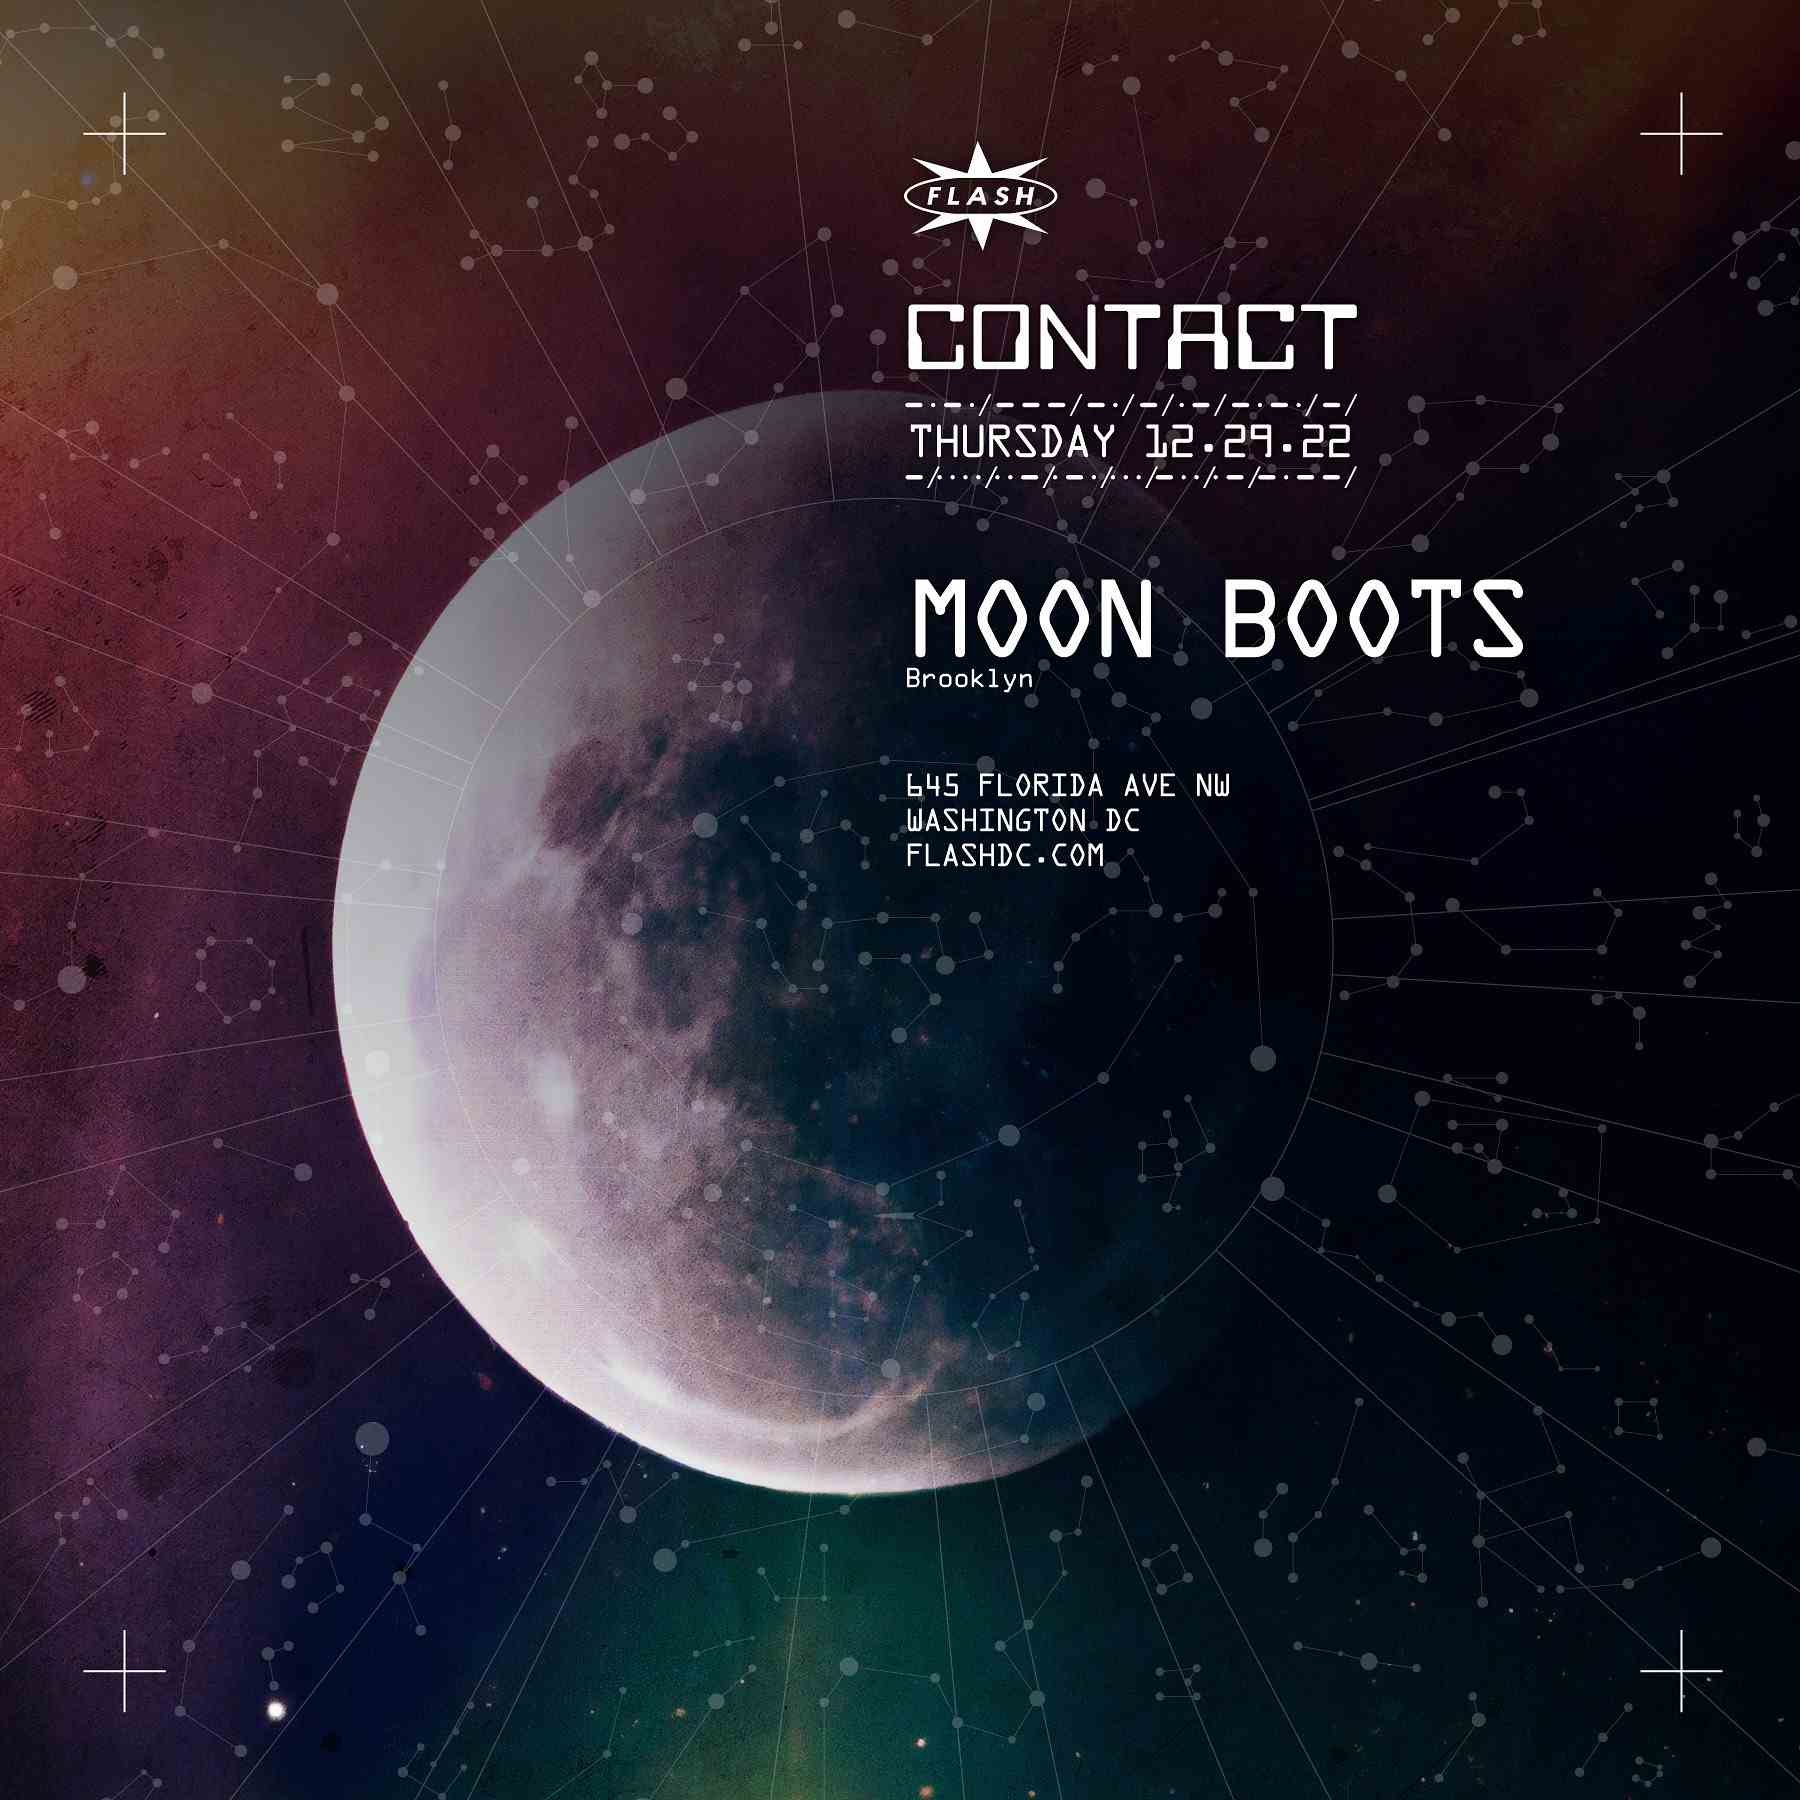 CONTACT: Moon Boots event thumbnail